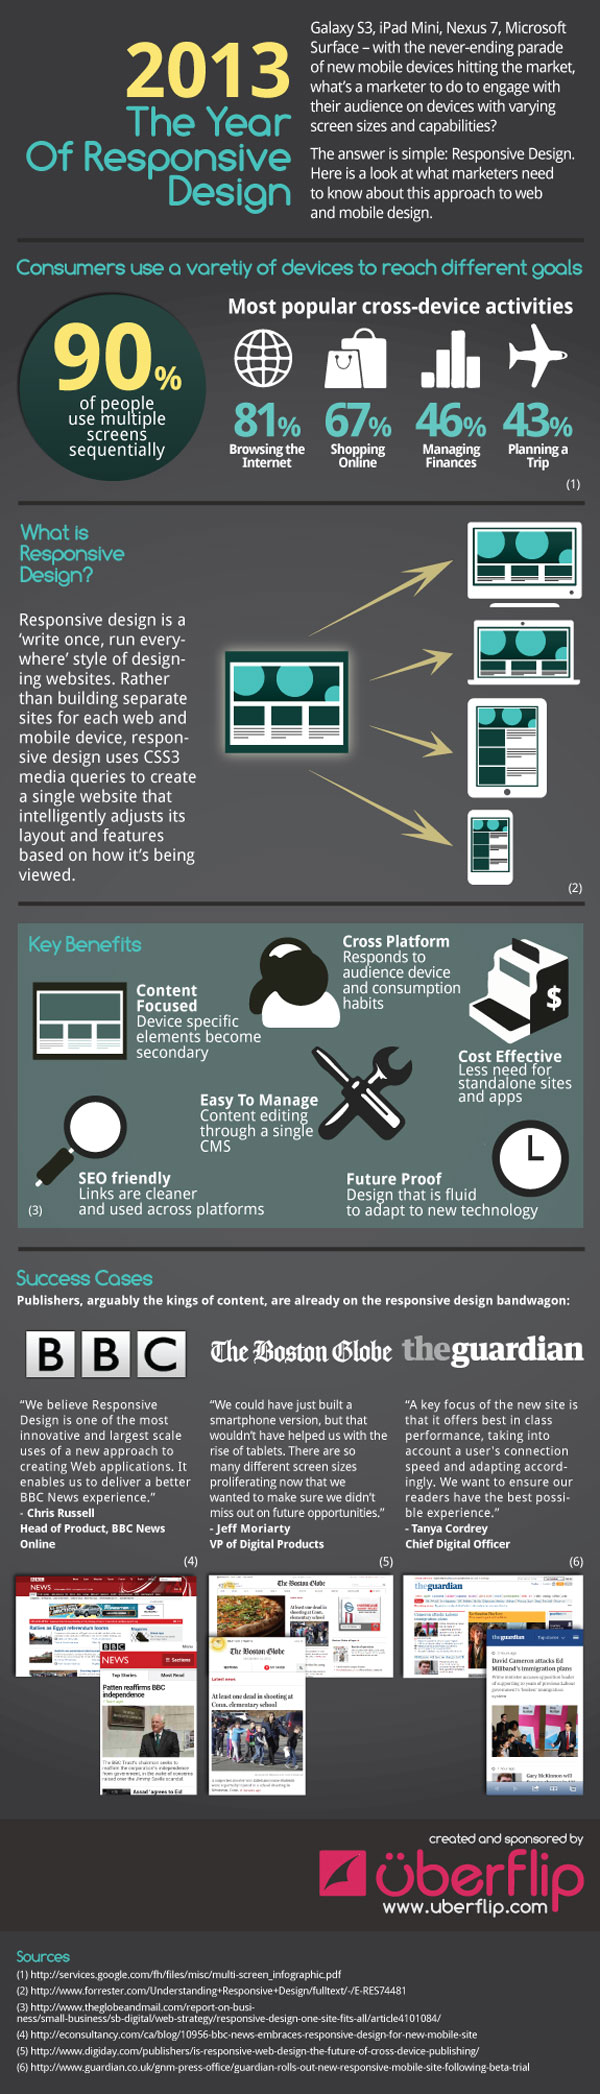 2013: Web Designers & Users Will Undergo A Big Change [Infographic]